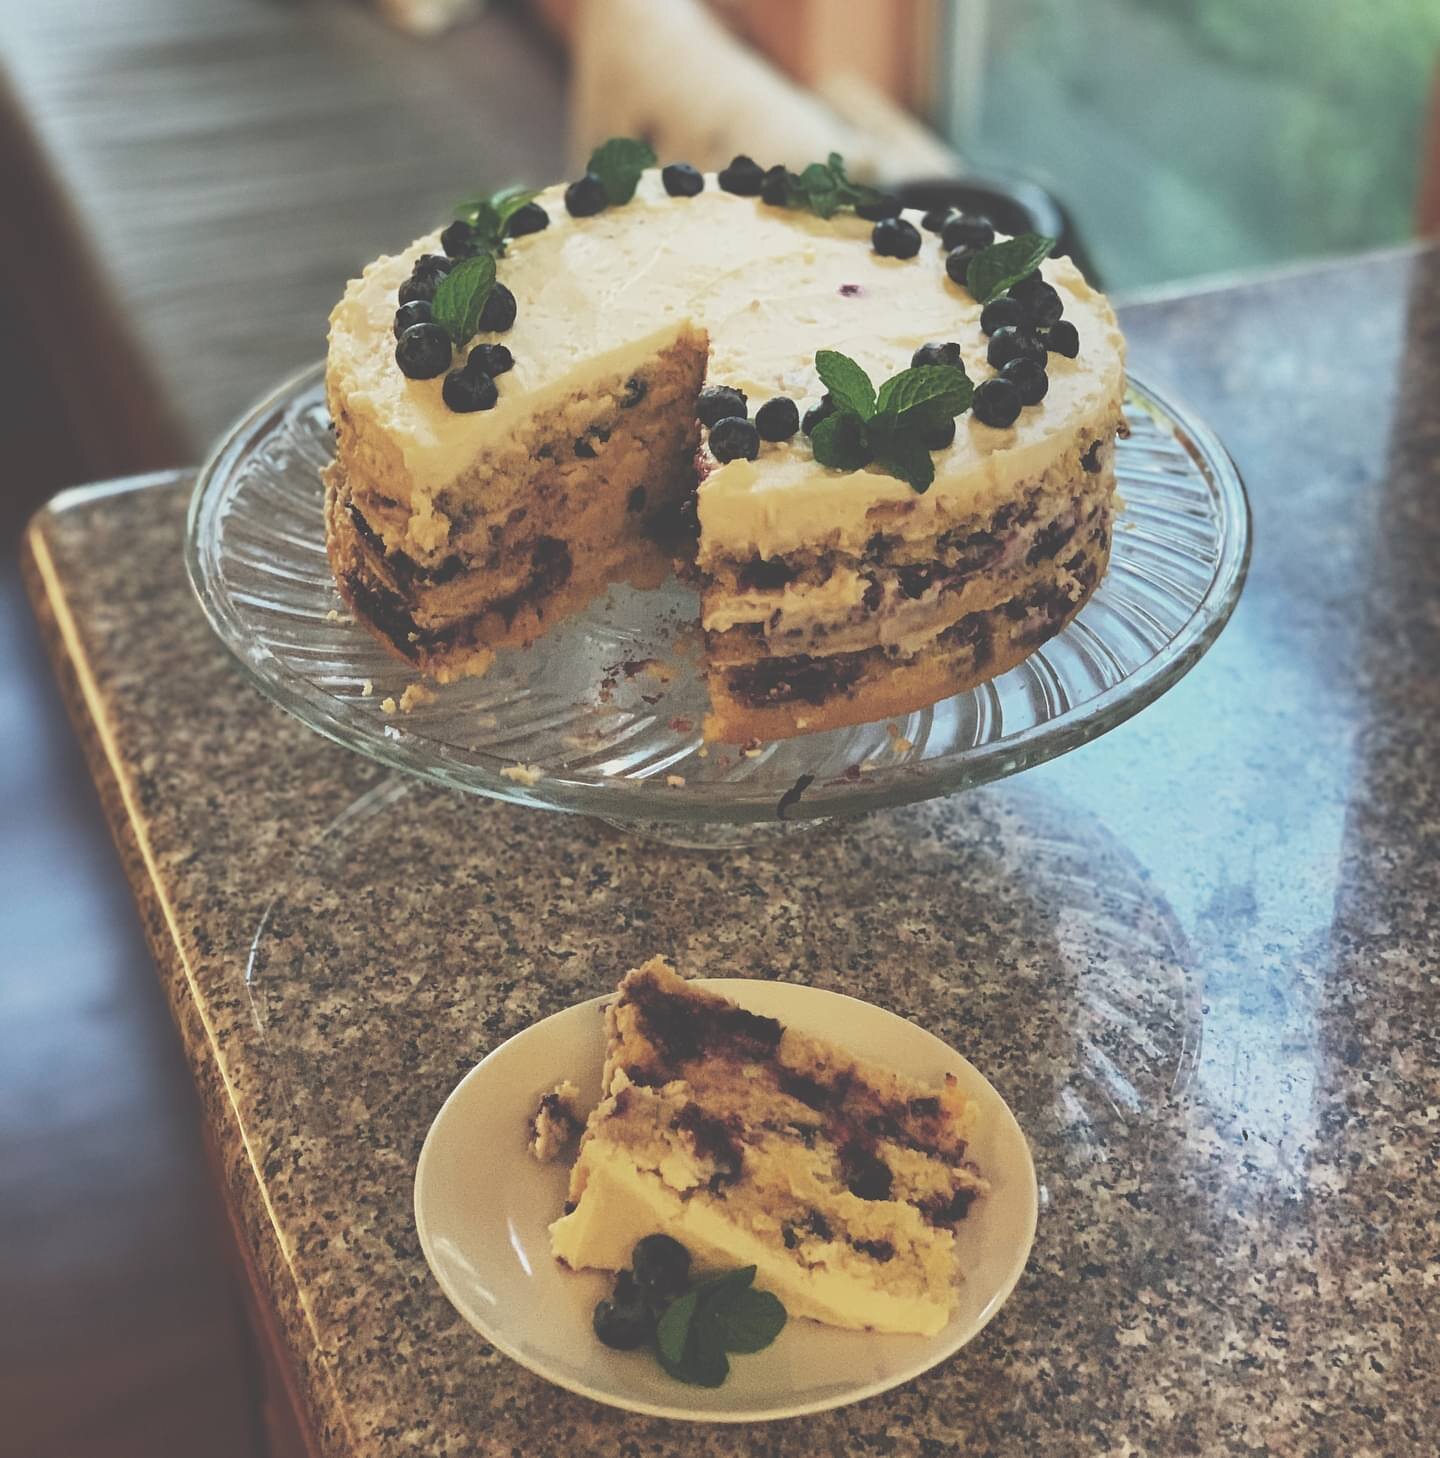 Lemon blueberry coconut cake for spring 🍋🫐🍃 

The backstory behind this cake is a bit convoluted. On Friday I was in a funk after several work meetings and new writing deadlines. So to cheer myself up (naturally!) I decided to watch BTS concert vl